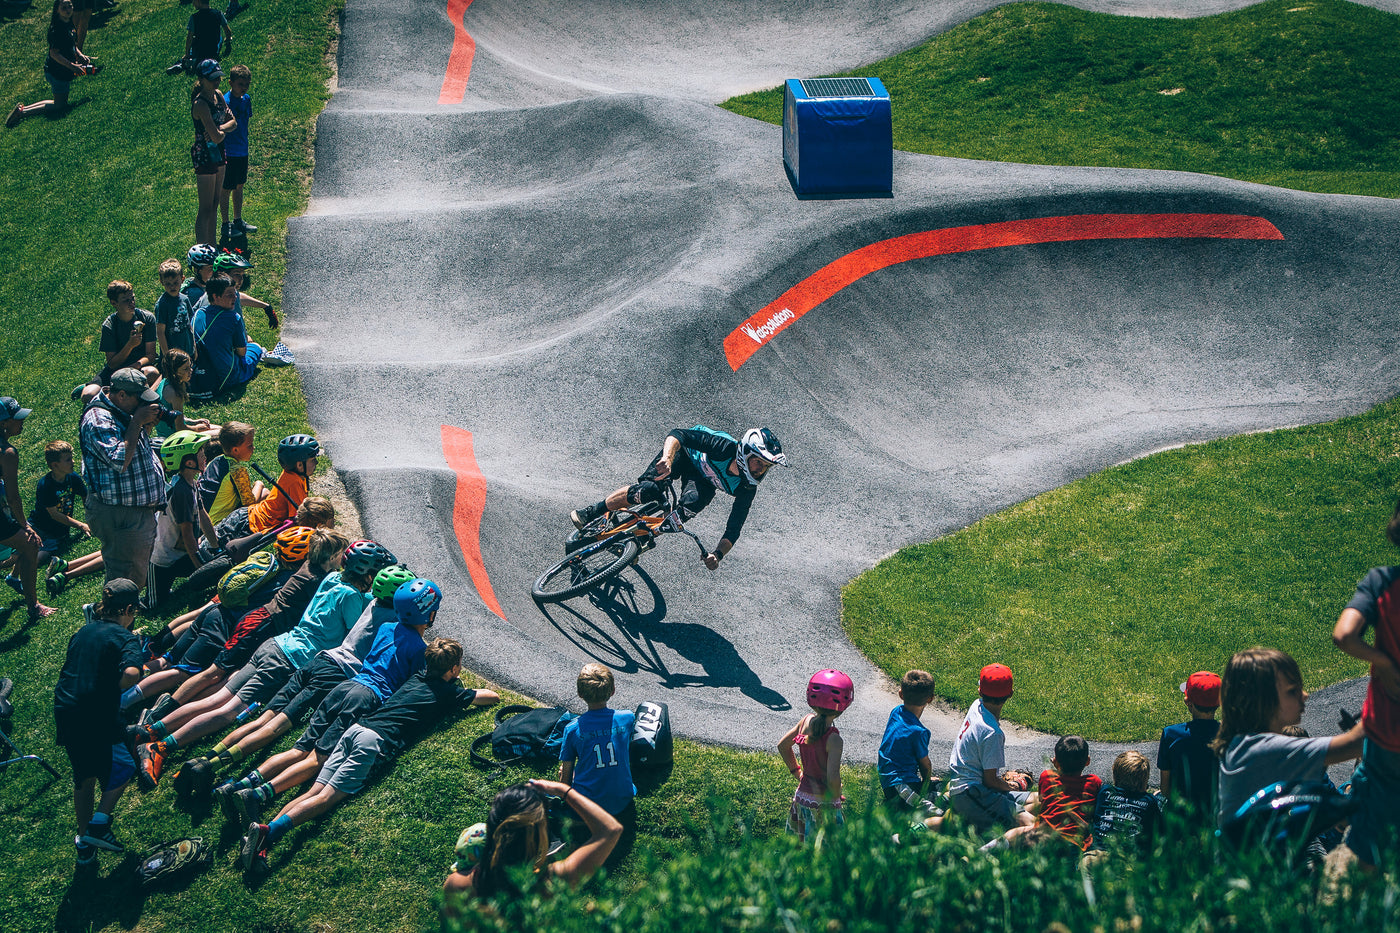 RED BULL WORLD CHAMP PUMP TRACK QUALIFIERS